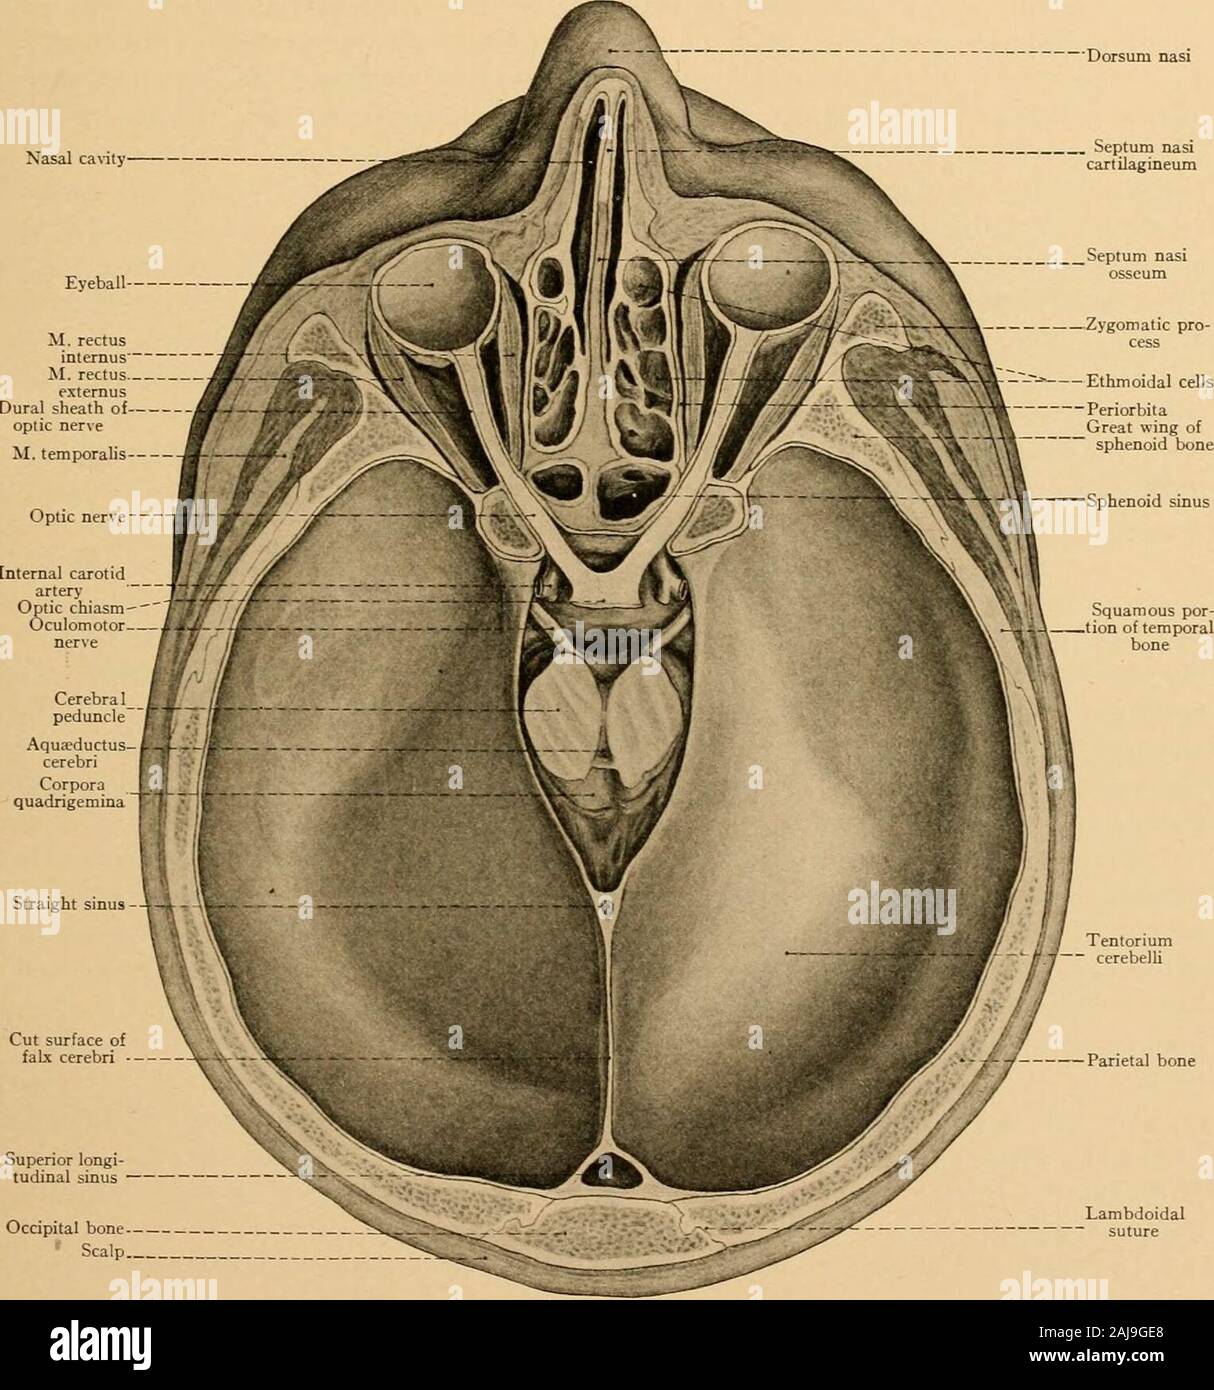 Atlas and text-book of topographic and applied anatomy . vein, the larger of the two,is situated at first at the inner side of the orbit; it passes outward between the optic nerve and thesuperior rectus and empties into the cavernous sinus through the sphenoidal fissure. At theinner canthus this vessel anastomoses with the angular vein (from the facial) and with the frontalvein (see Plate 2). The injerior ophthalmic vein arises in the central portion of the floor of theorbit and empties partly through the sphenoidal fissure into the cavernous sinus and partlythrough the spheno-maxillary fissur Stock Photo